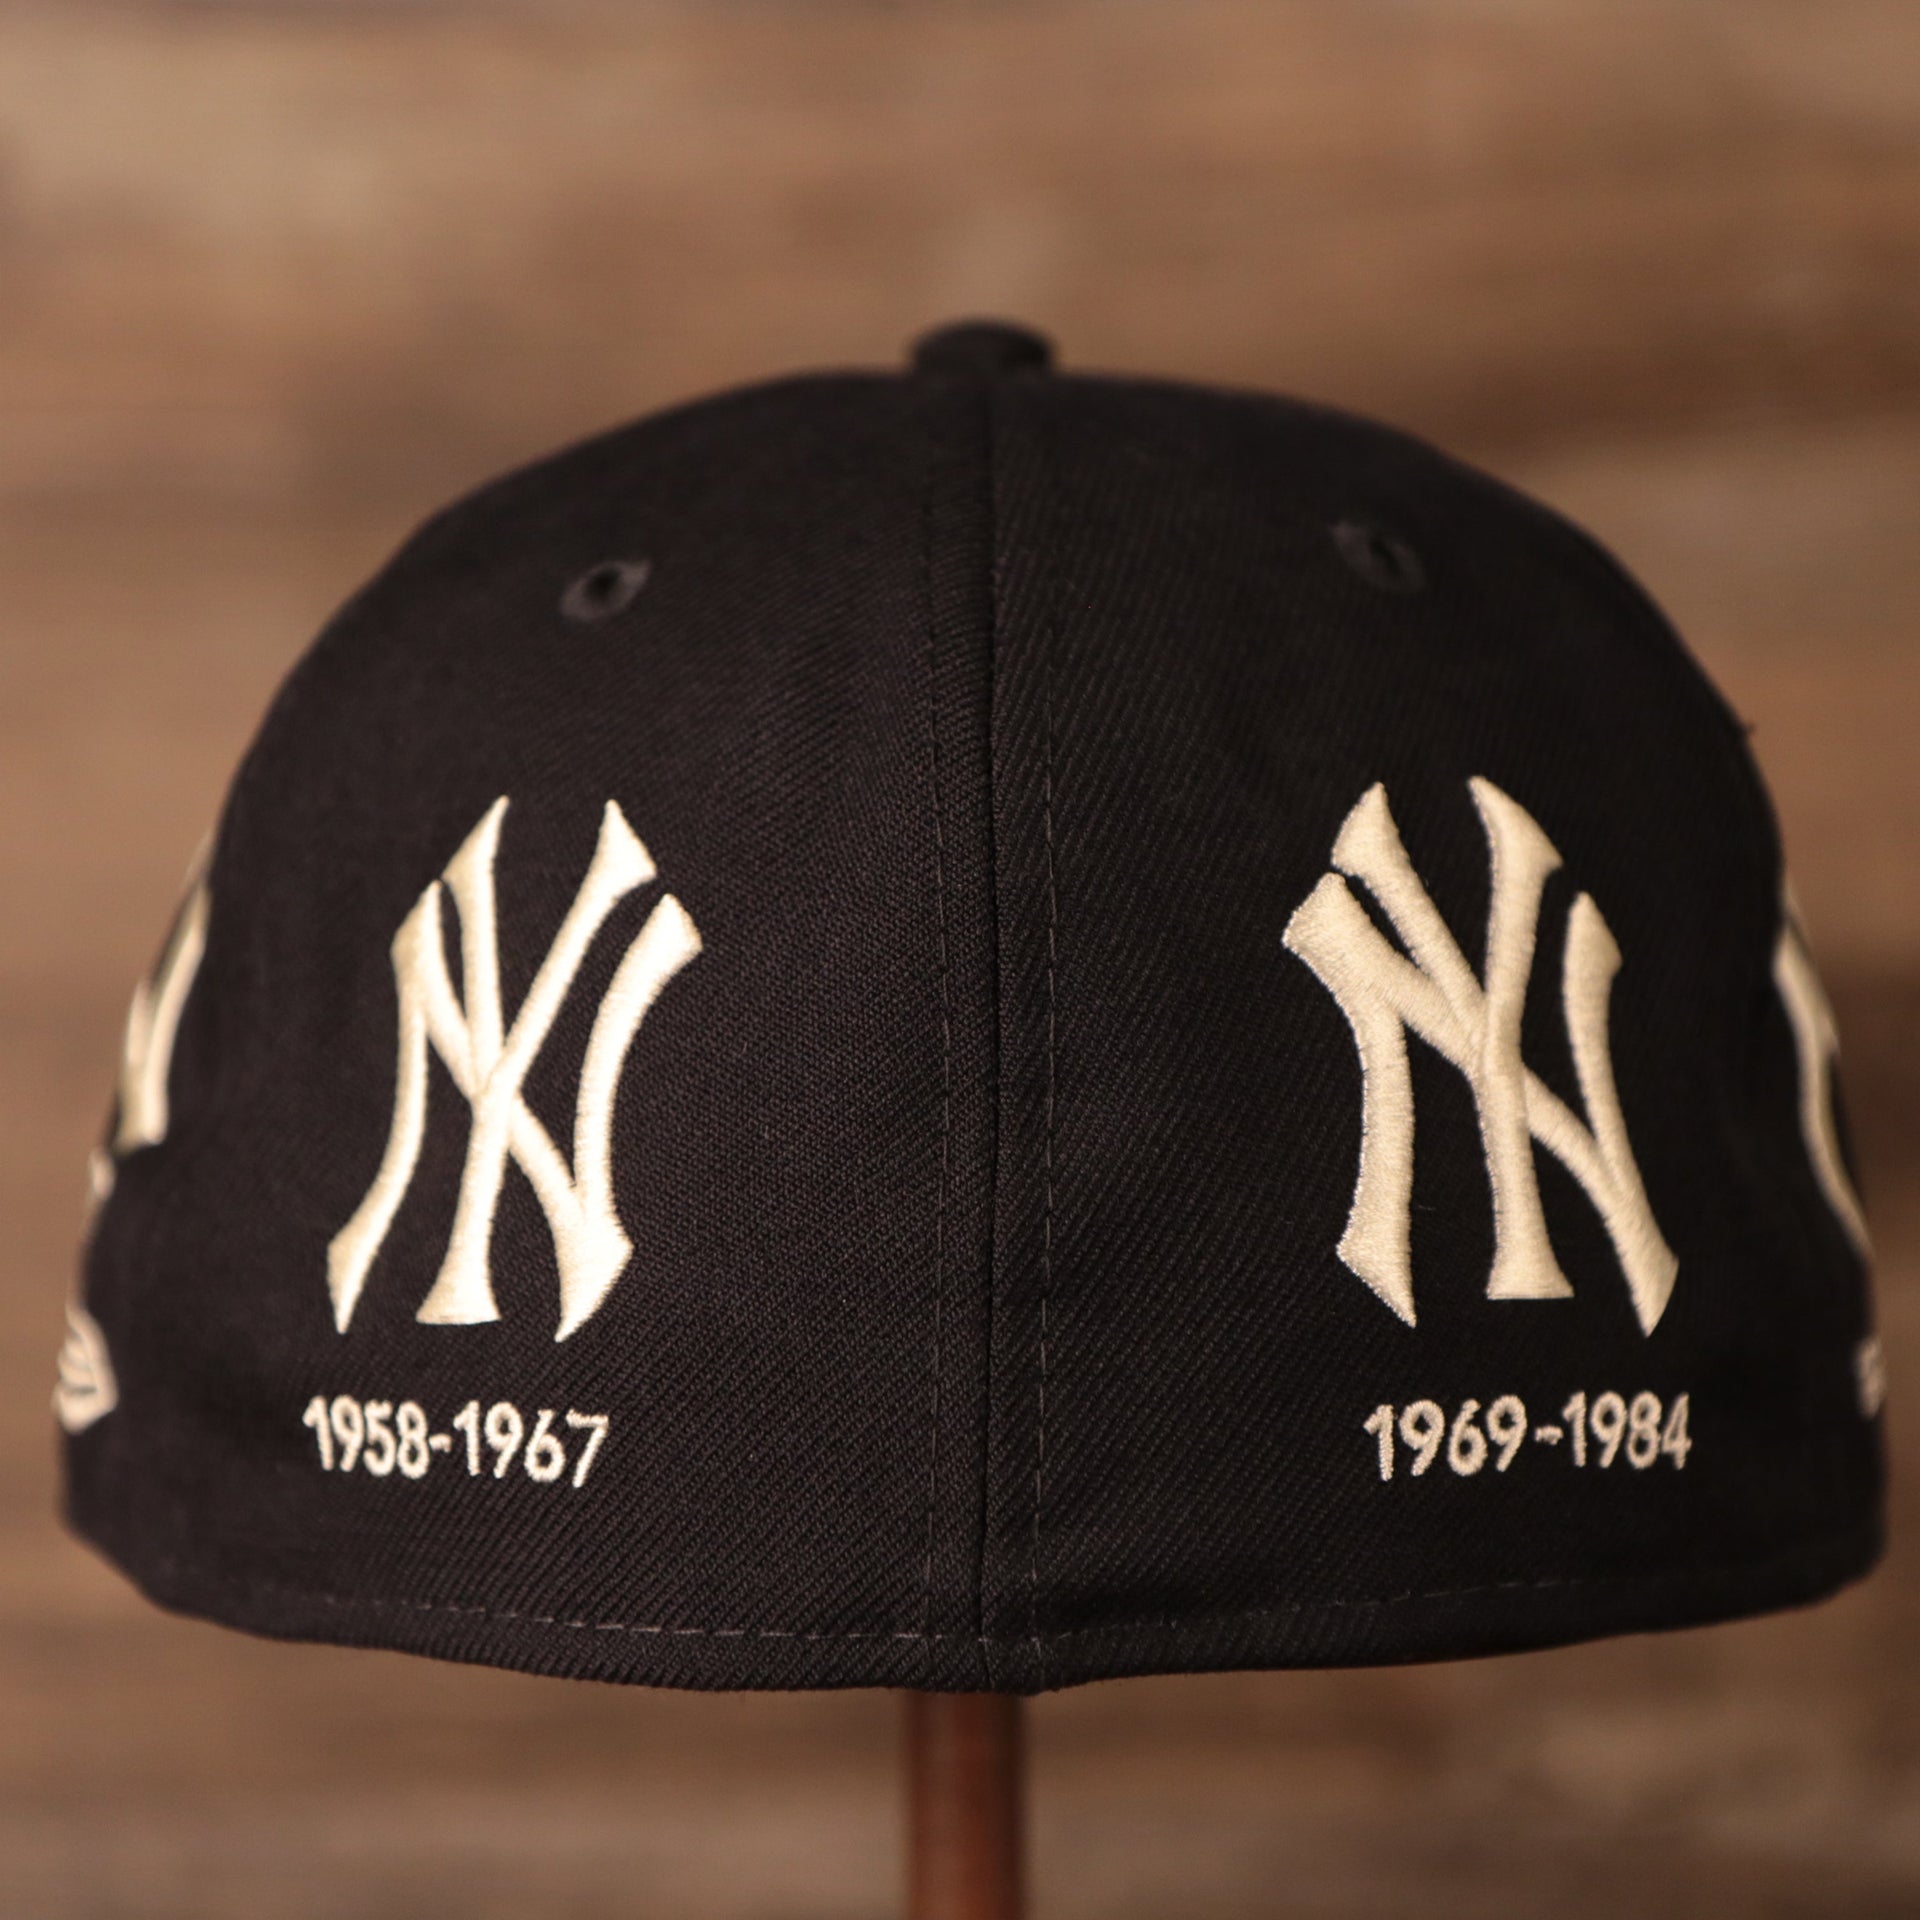 The Yanks vintage, all-over patch fitted hat with the Yanks logo history by New Era.